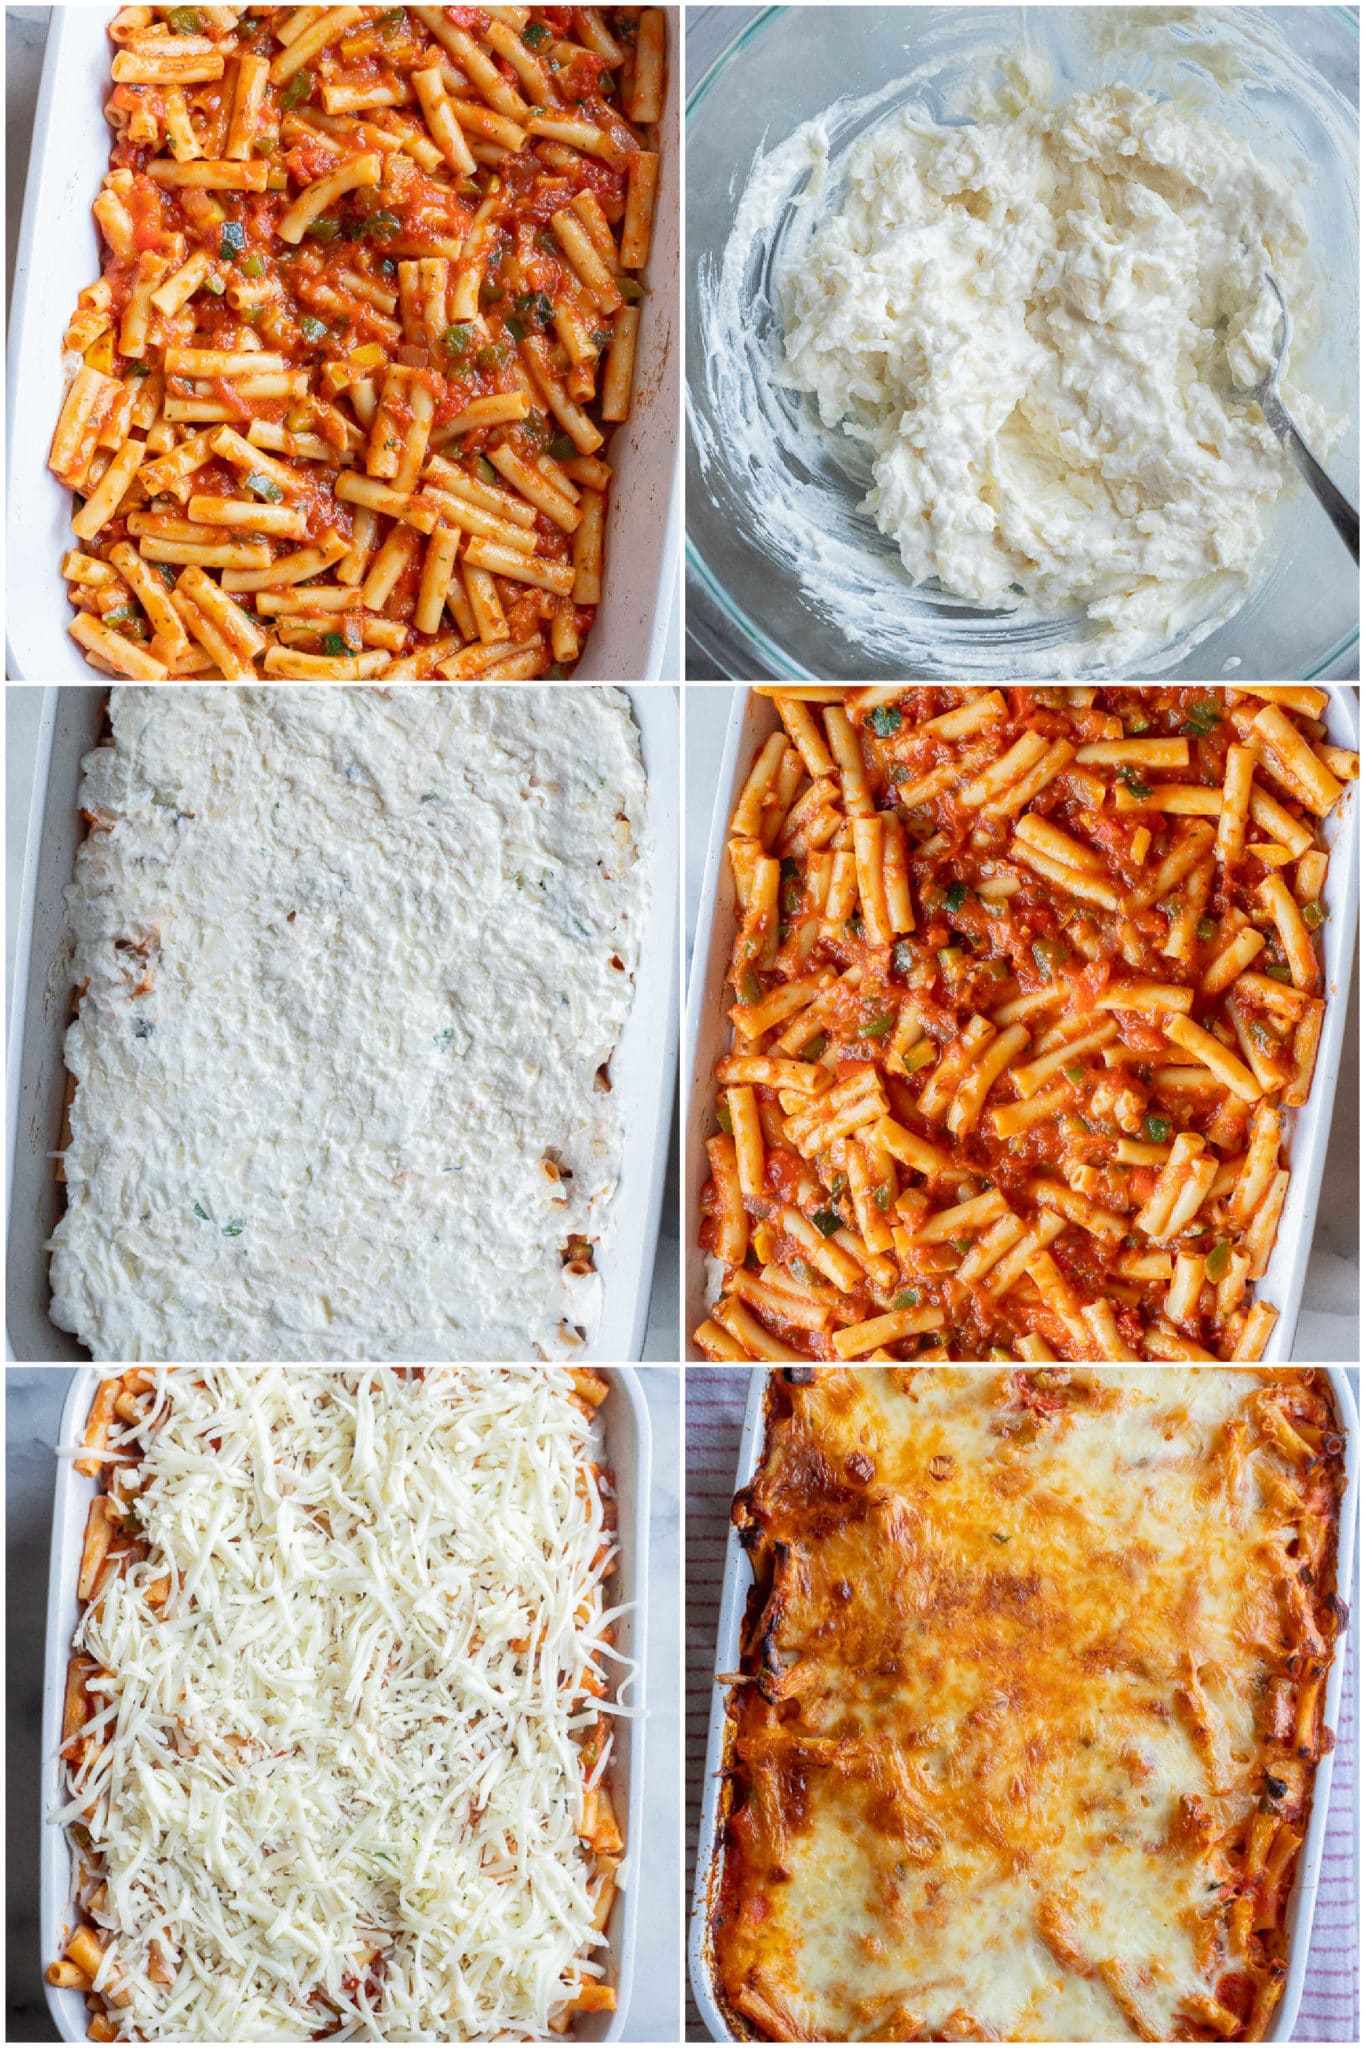 showing how to assemble a baked ziti recipe using cottage cheese